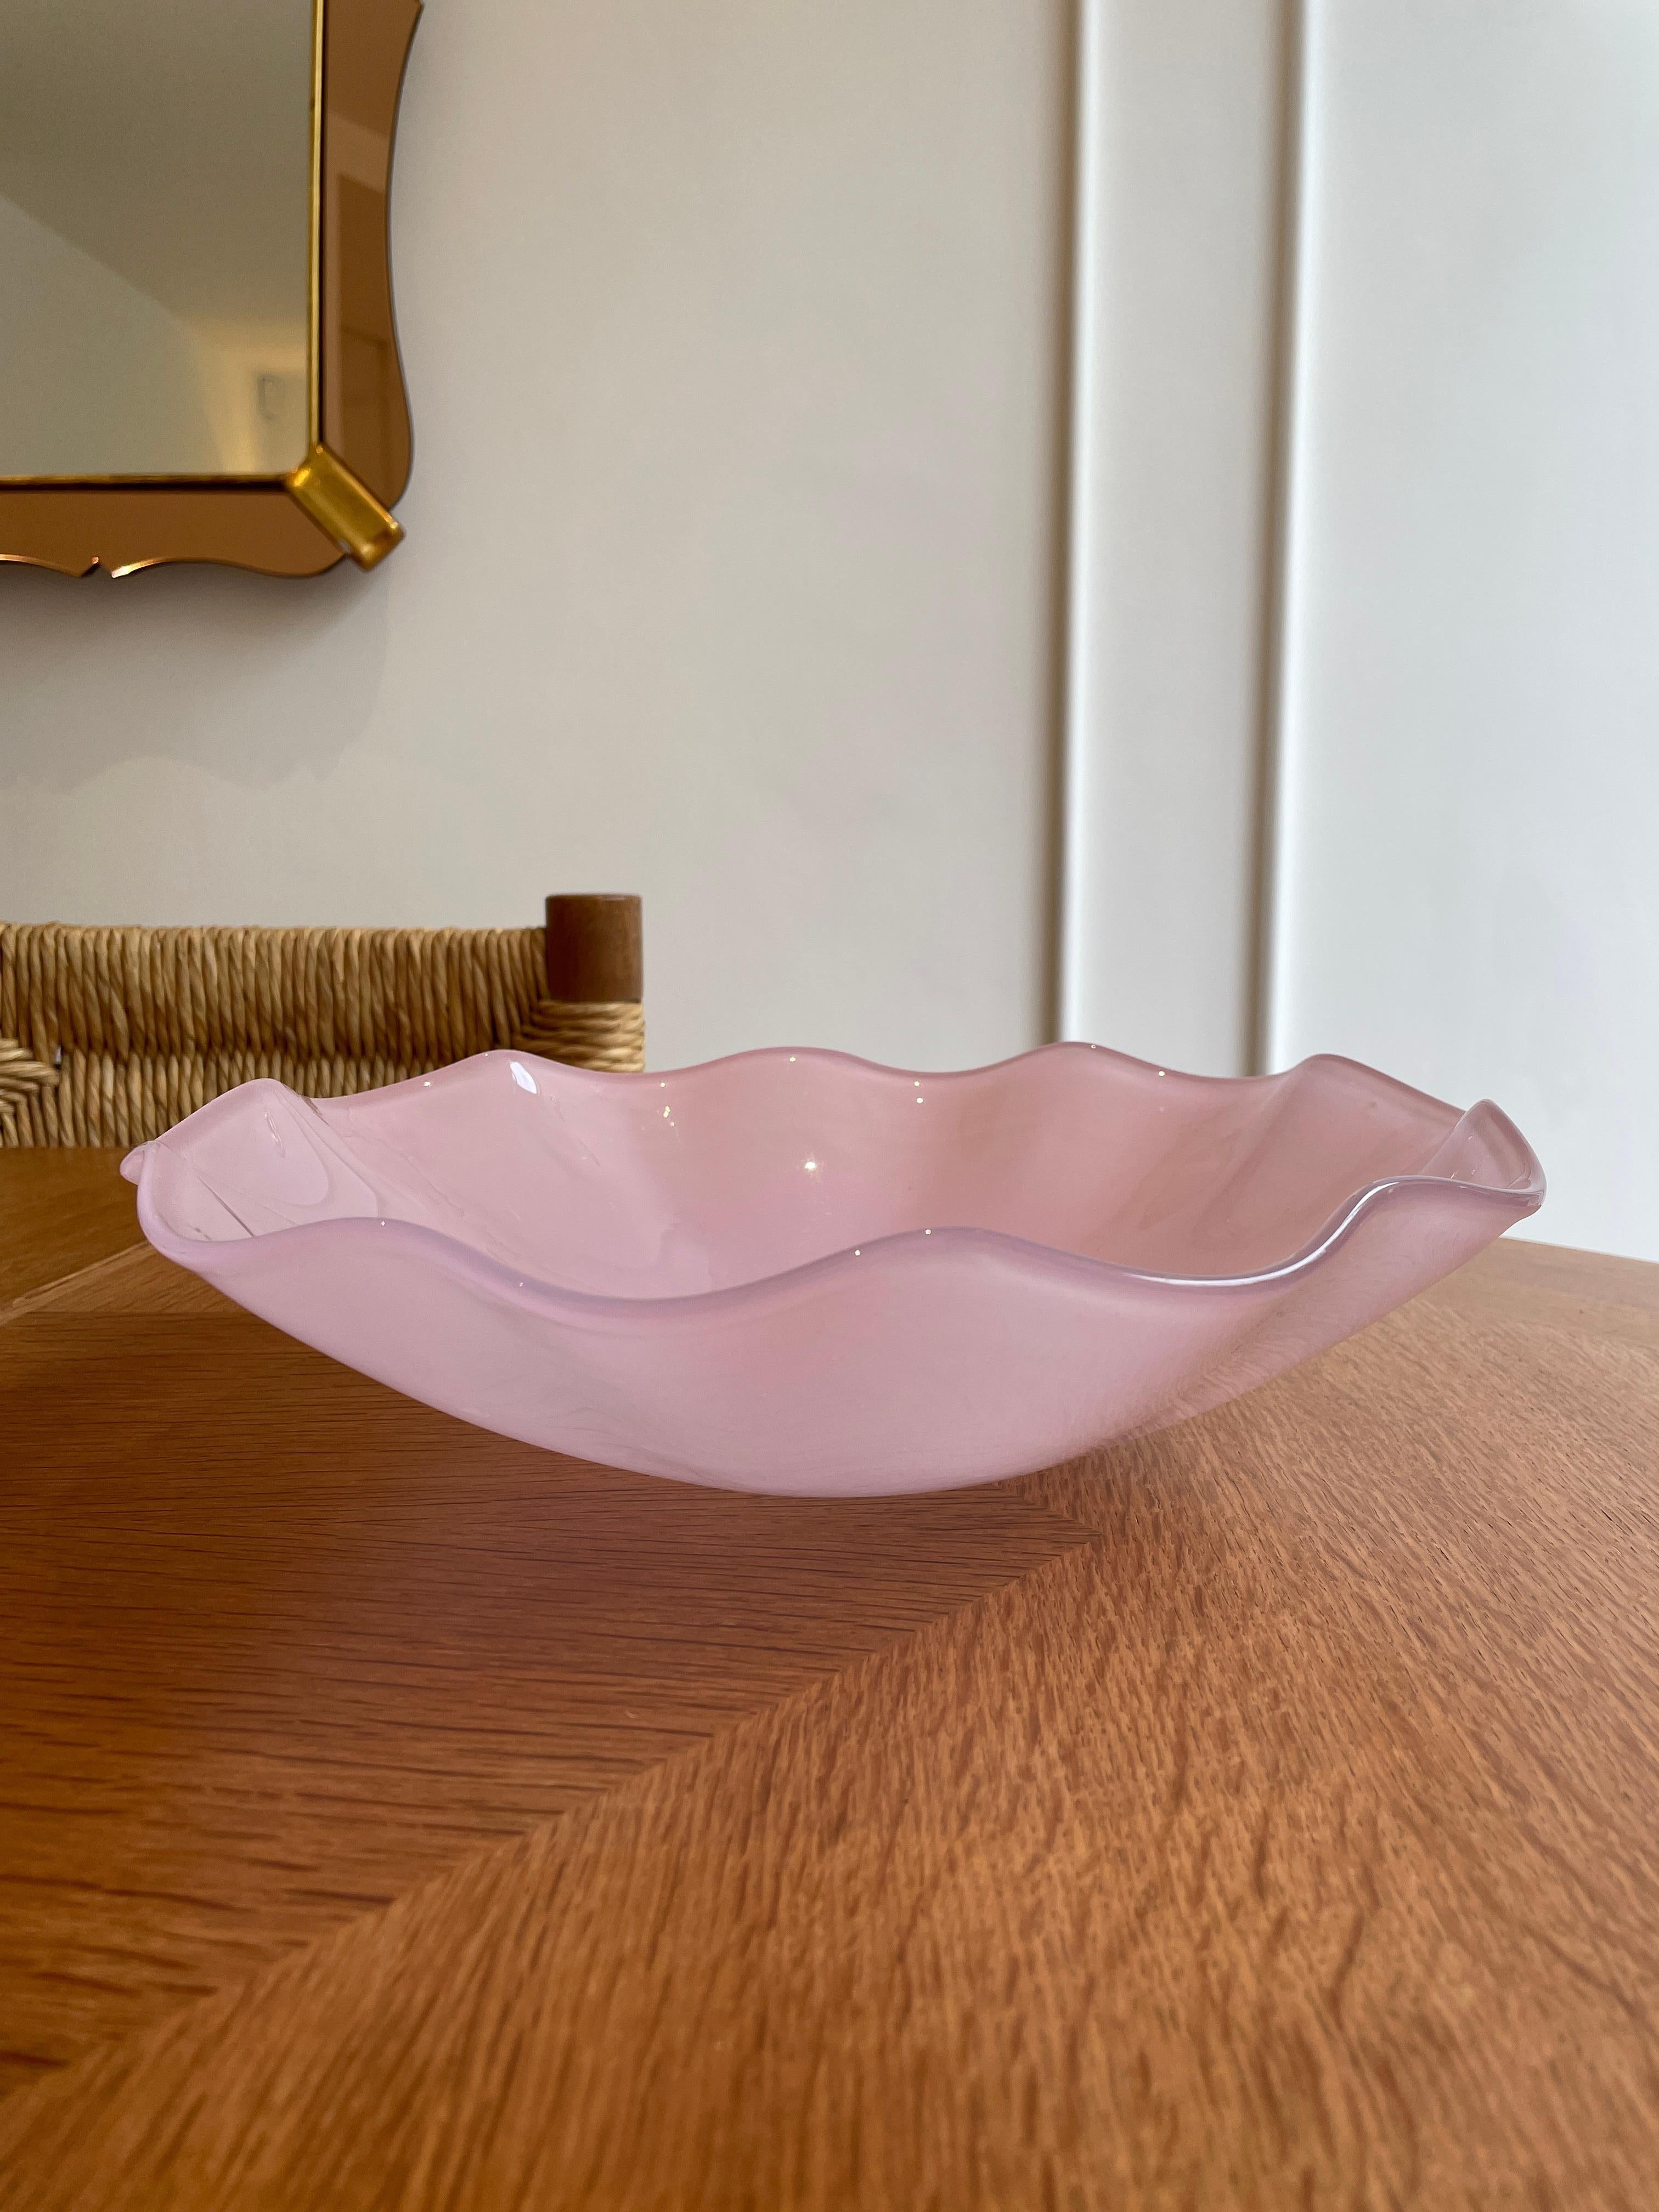 Sven Palmqvist Bowl In Good Condition For Sale In London, England